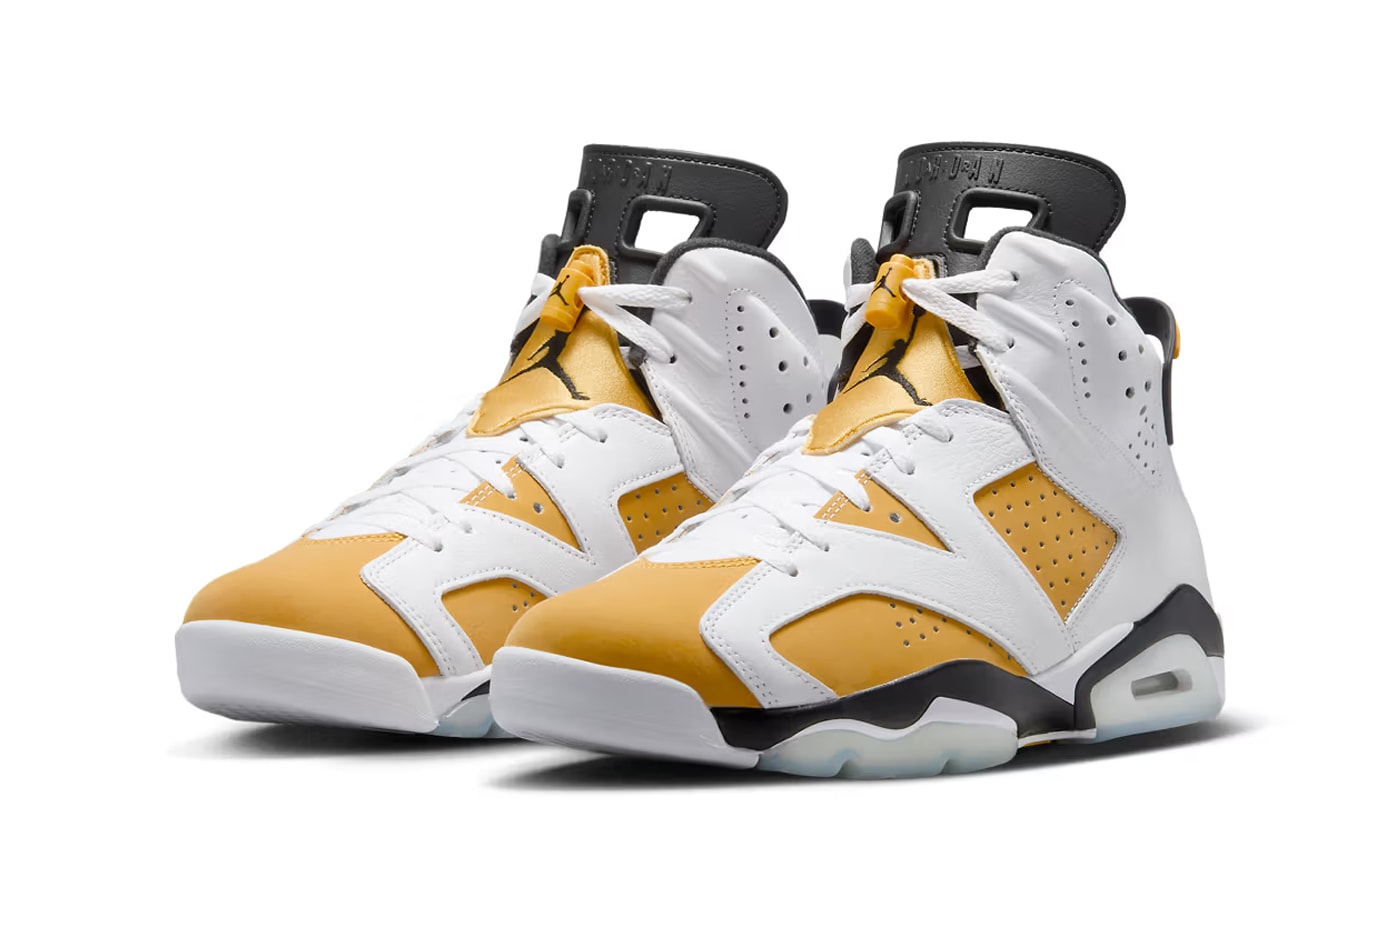 air jordan 6 yellow ochre CT8529 170 release date info store list buying guide photos price 